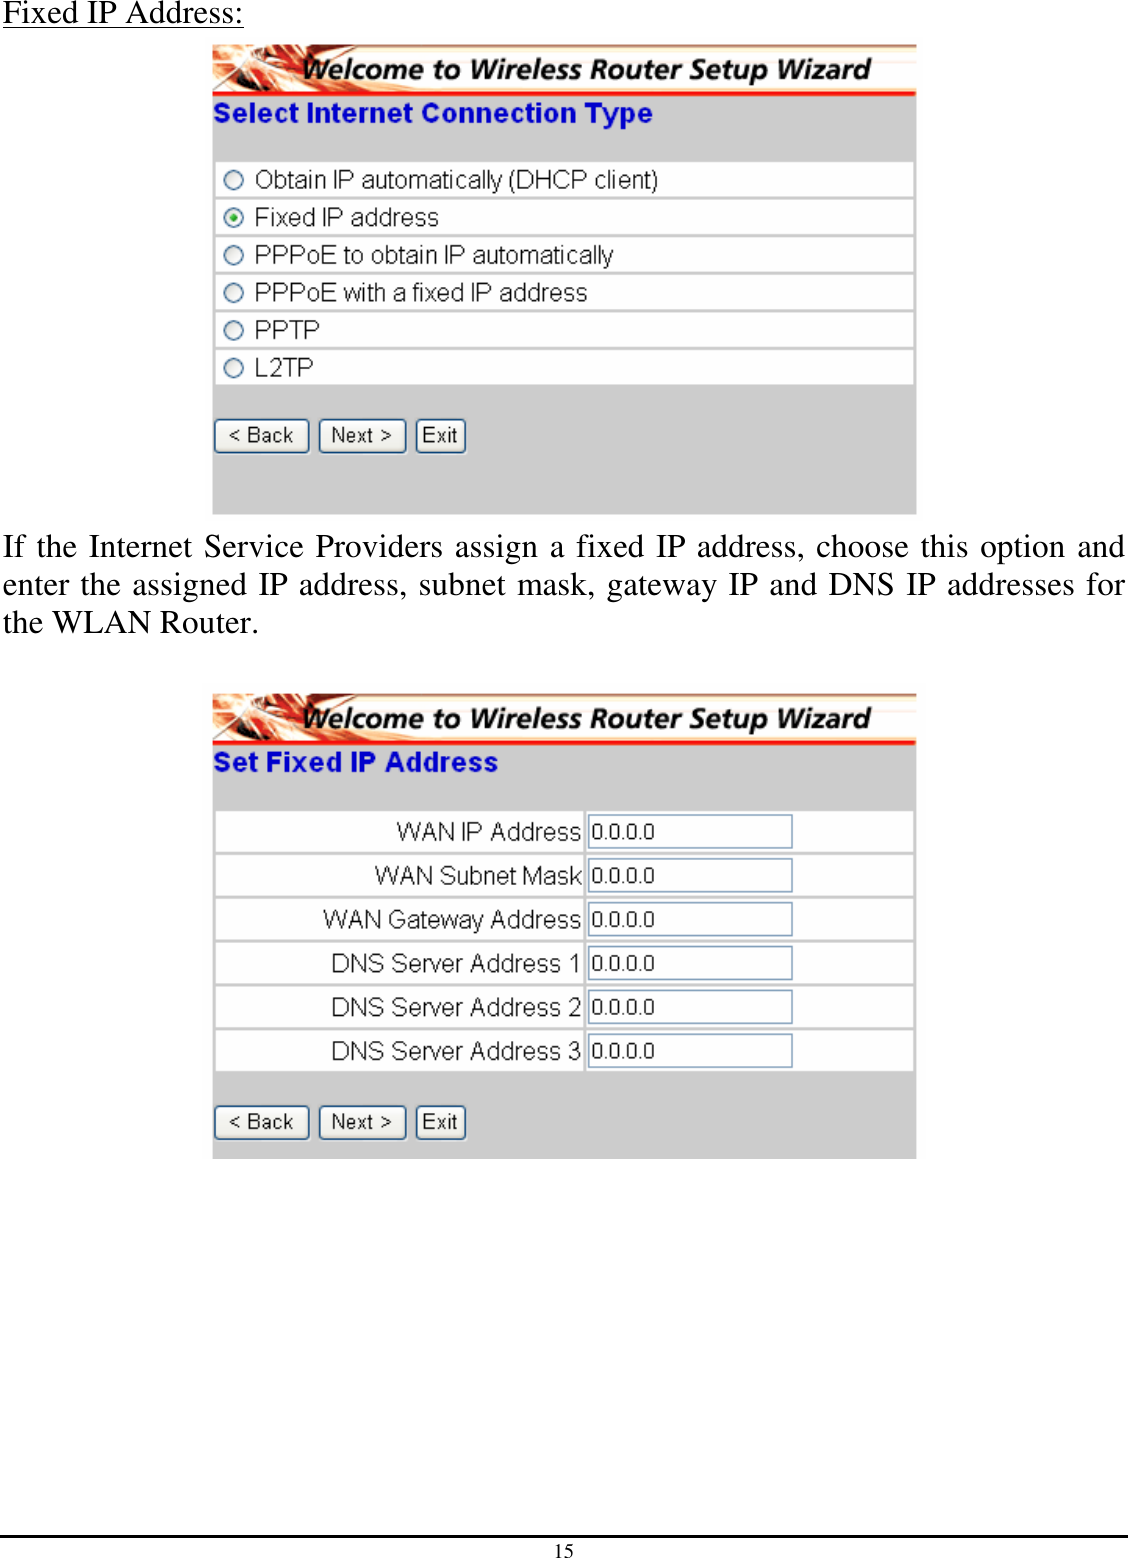 15 Fixed IP Address:  If the Internet Service Providers assign a fixed IP address, choose this option and enter the assigned IP address, subnet mask, gateway IP and DNS IP addresses for the WLAN Router.    